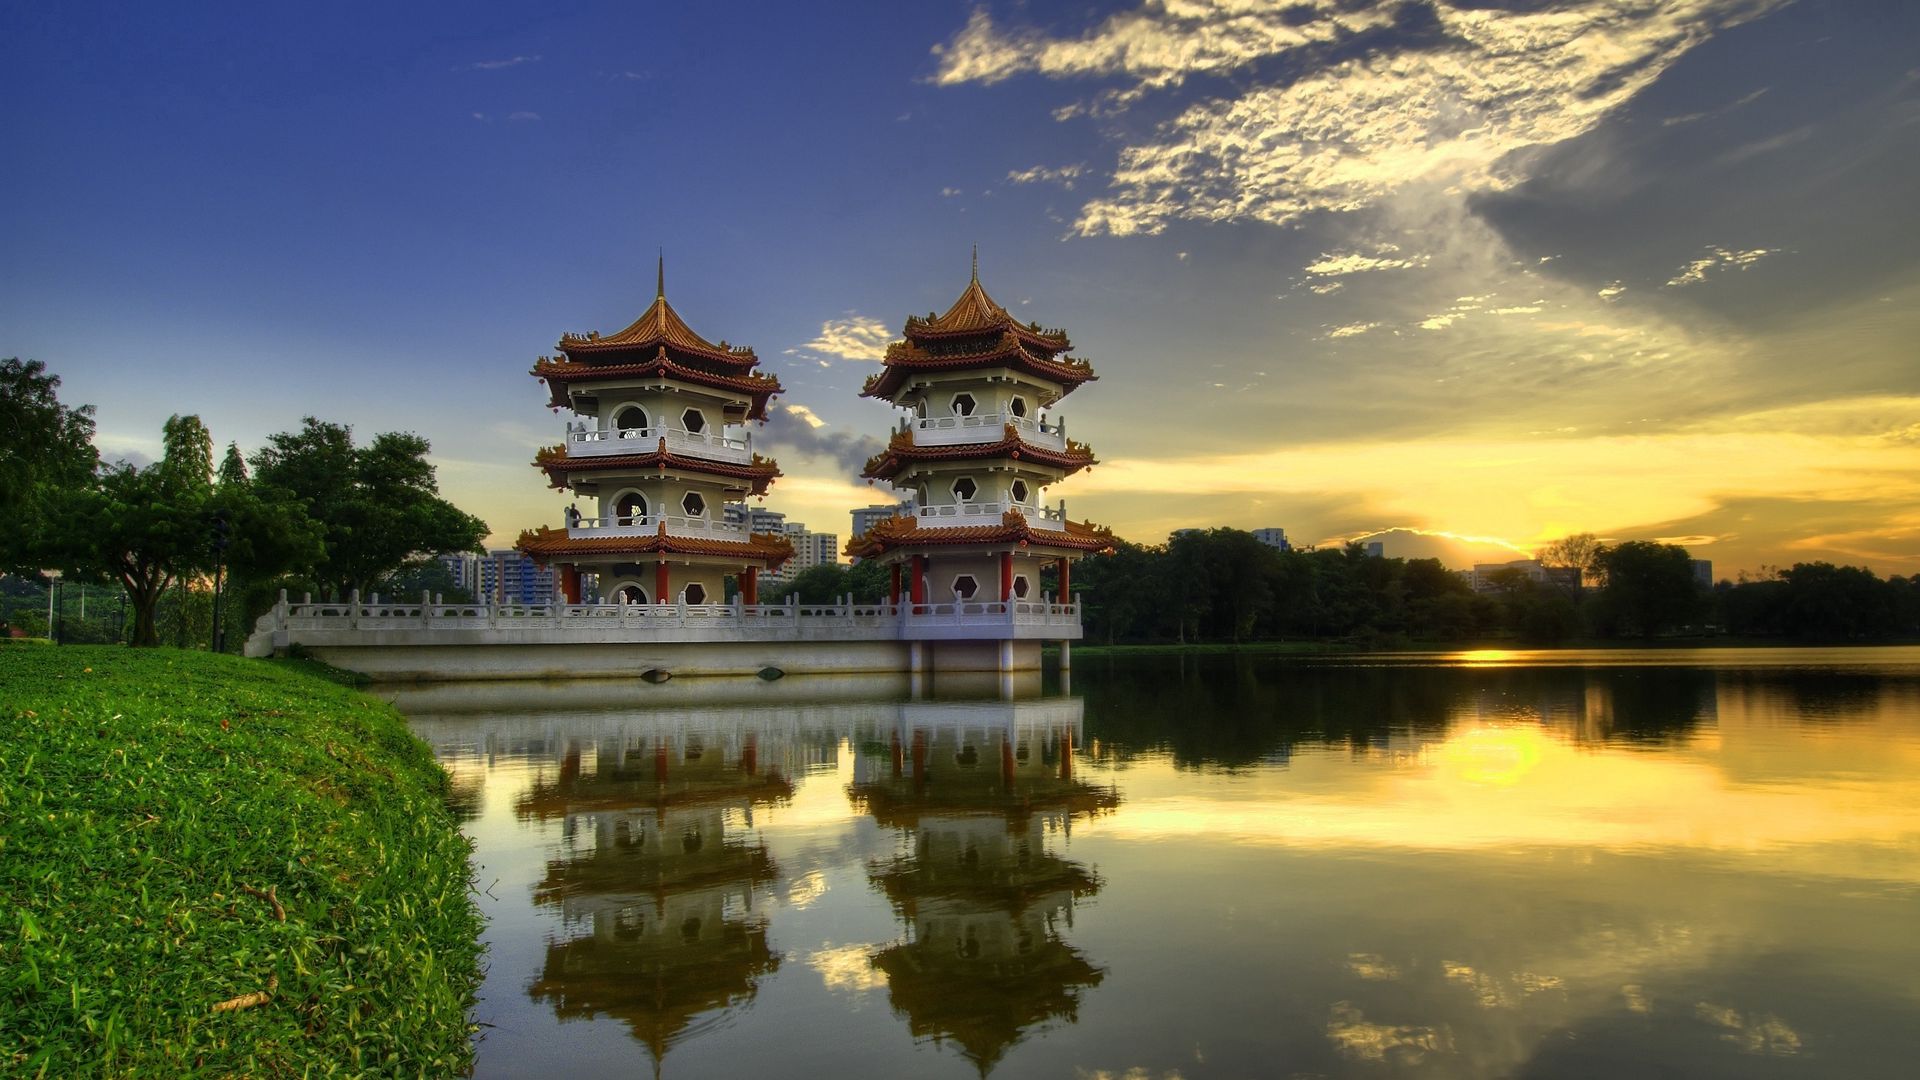 Download wallpaper 1920x1080 city, china, water, grass full hd, hdtv, fhd, 1080p HD background